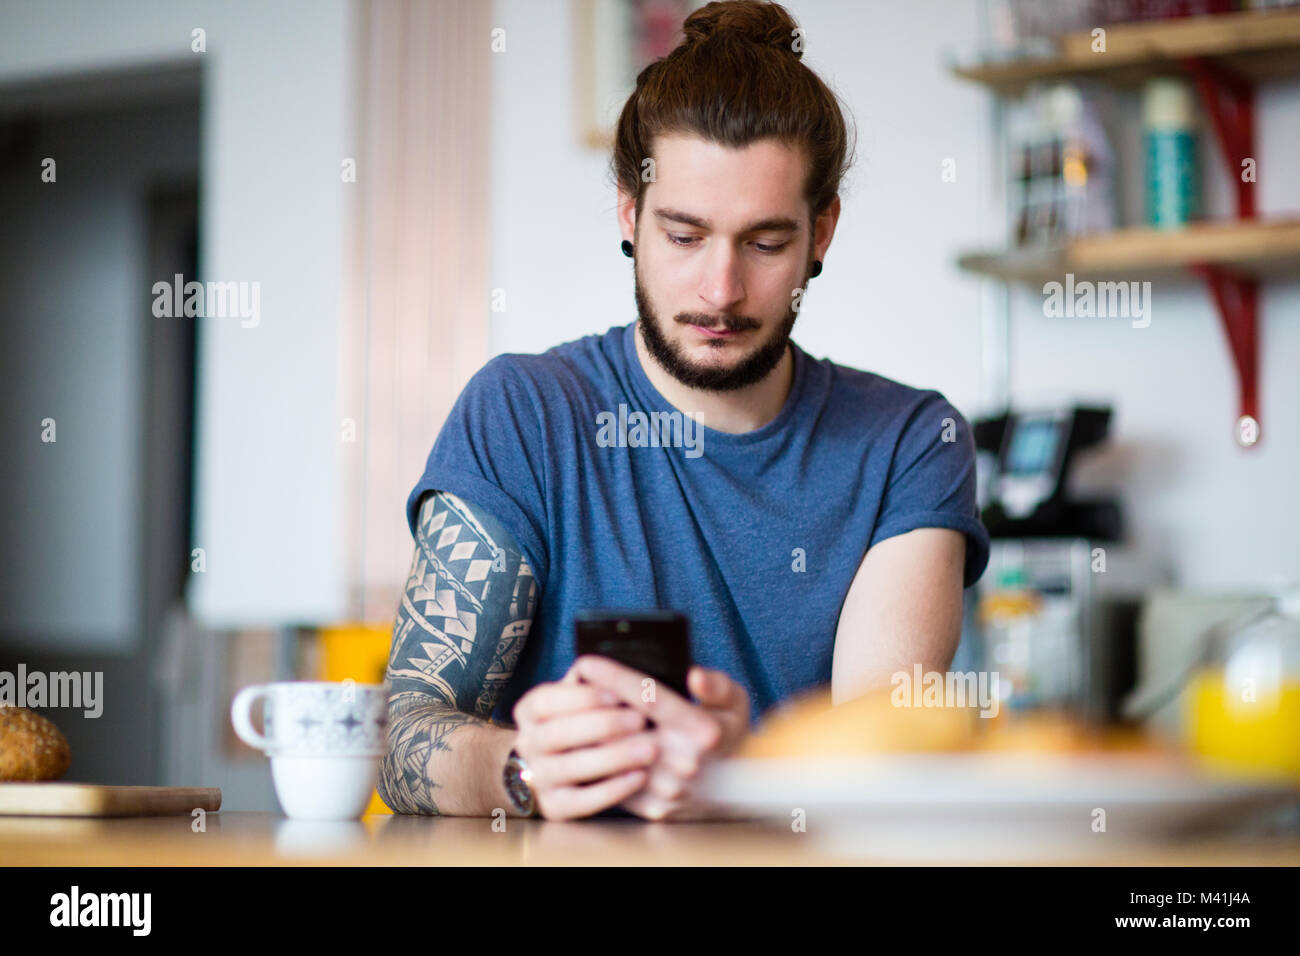 Young adult male having morning coffee and checking smartphone Stock Photo